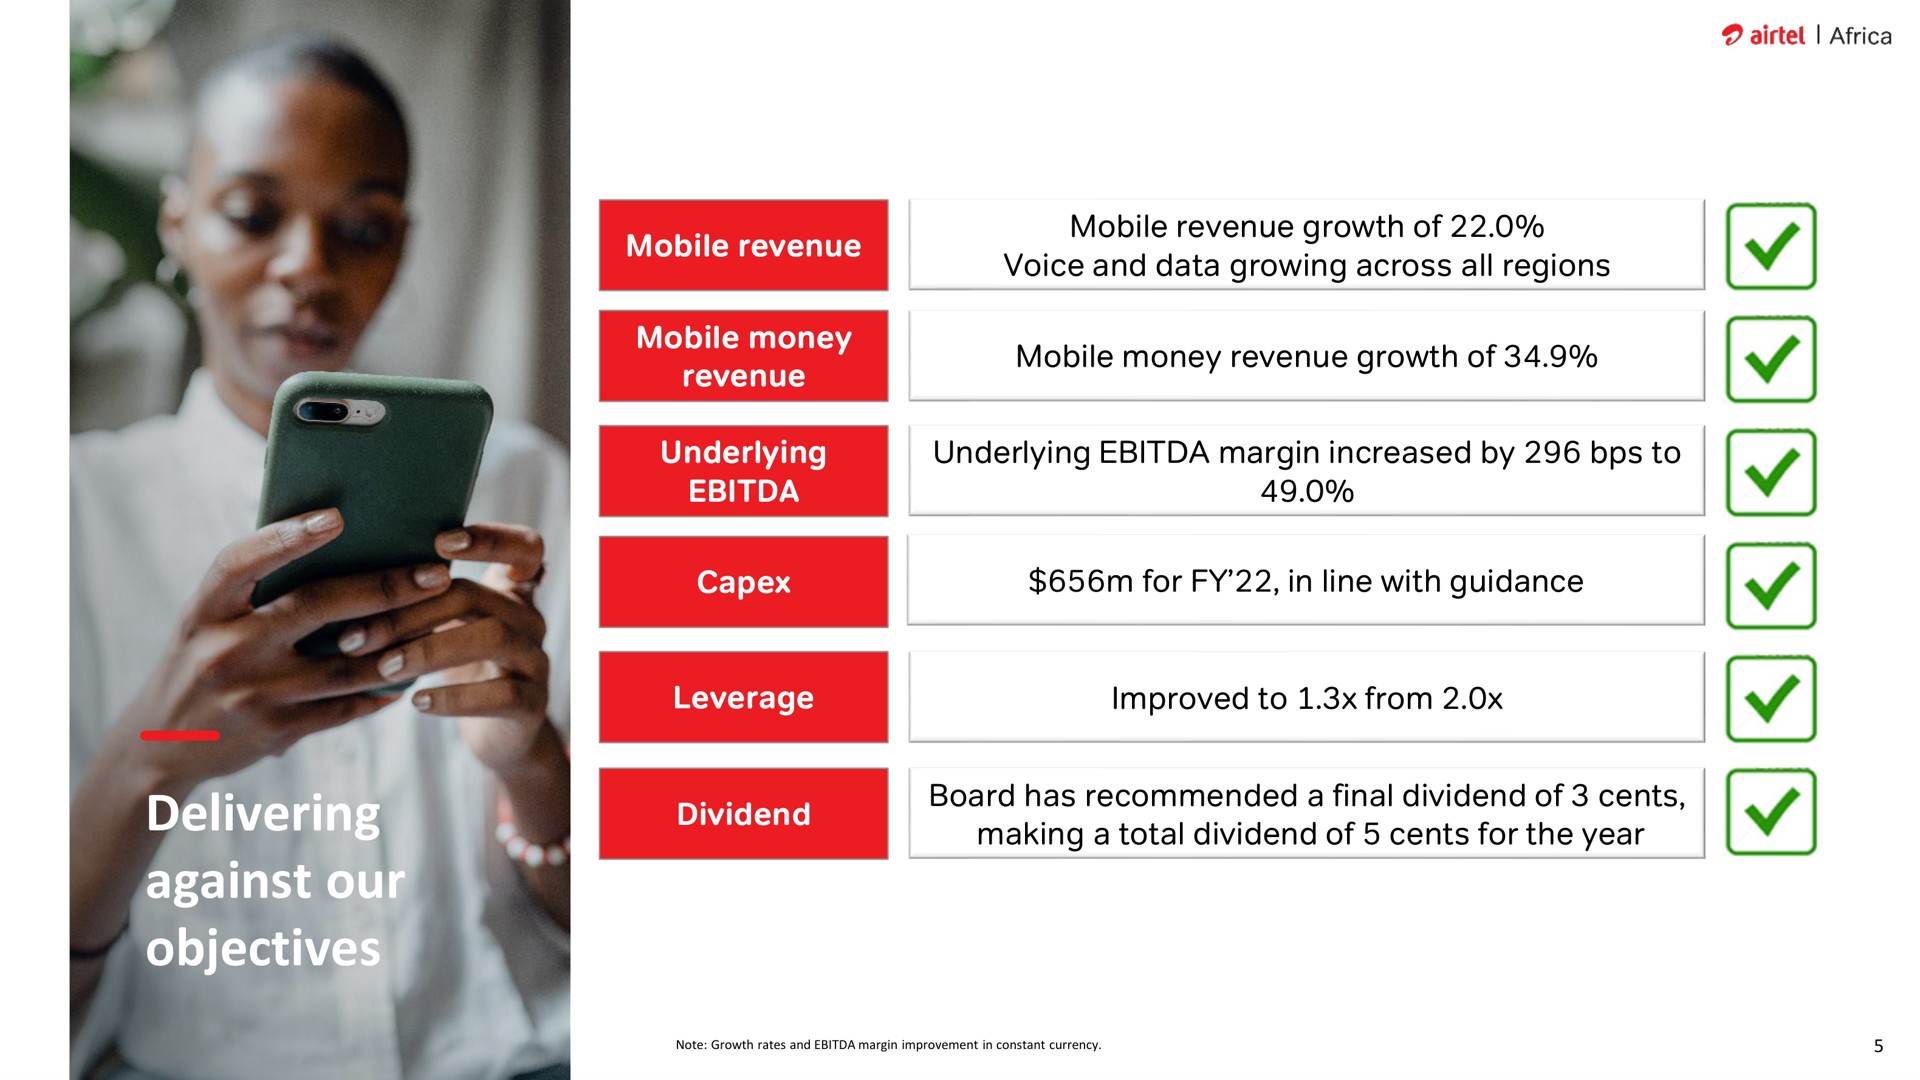 delivering against our objectives revenue mobile revenue growth of voice and data growing across all regions mobile money revenue growth of leverage by eye for in line with guidance improved to from making a total dividend of cents for the year i i i i i | Airtel Africa